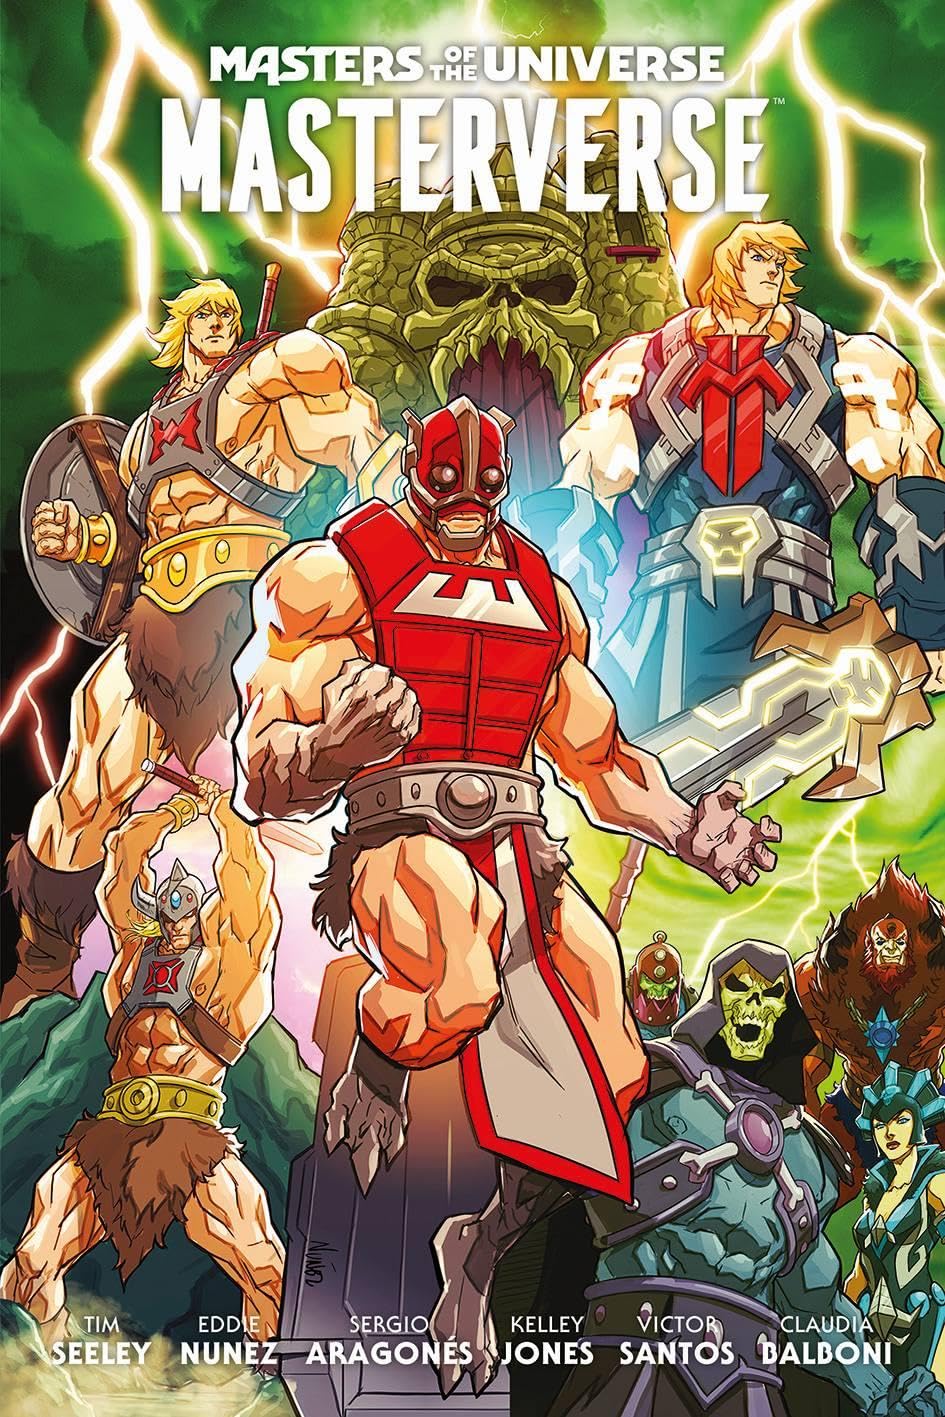 Review: “Masters of the Universe – Masterverse”